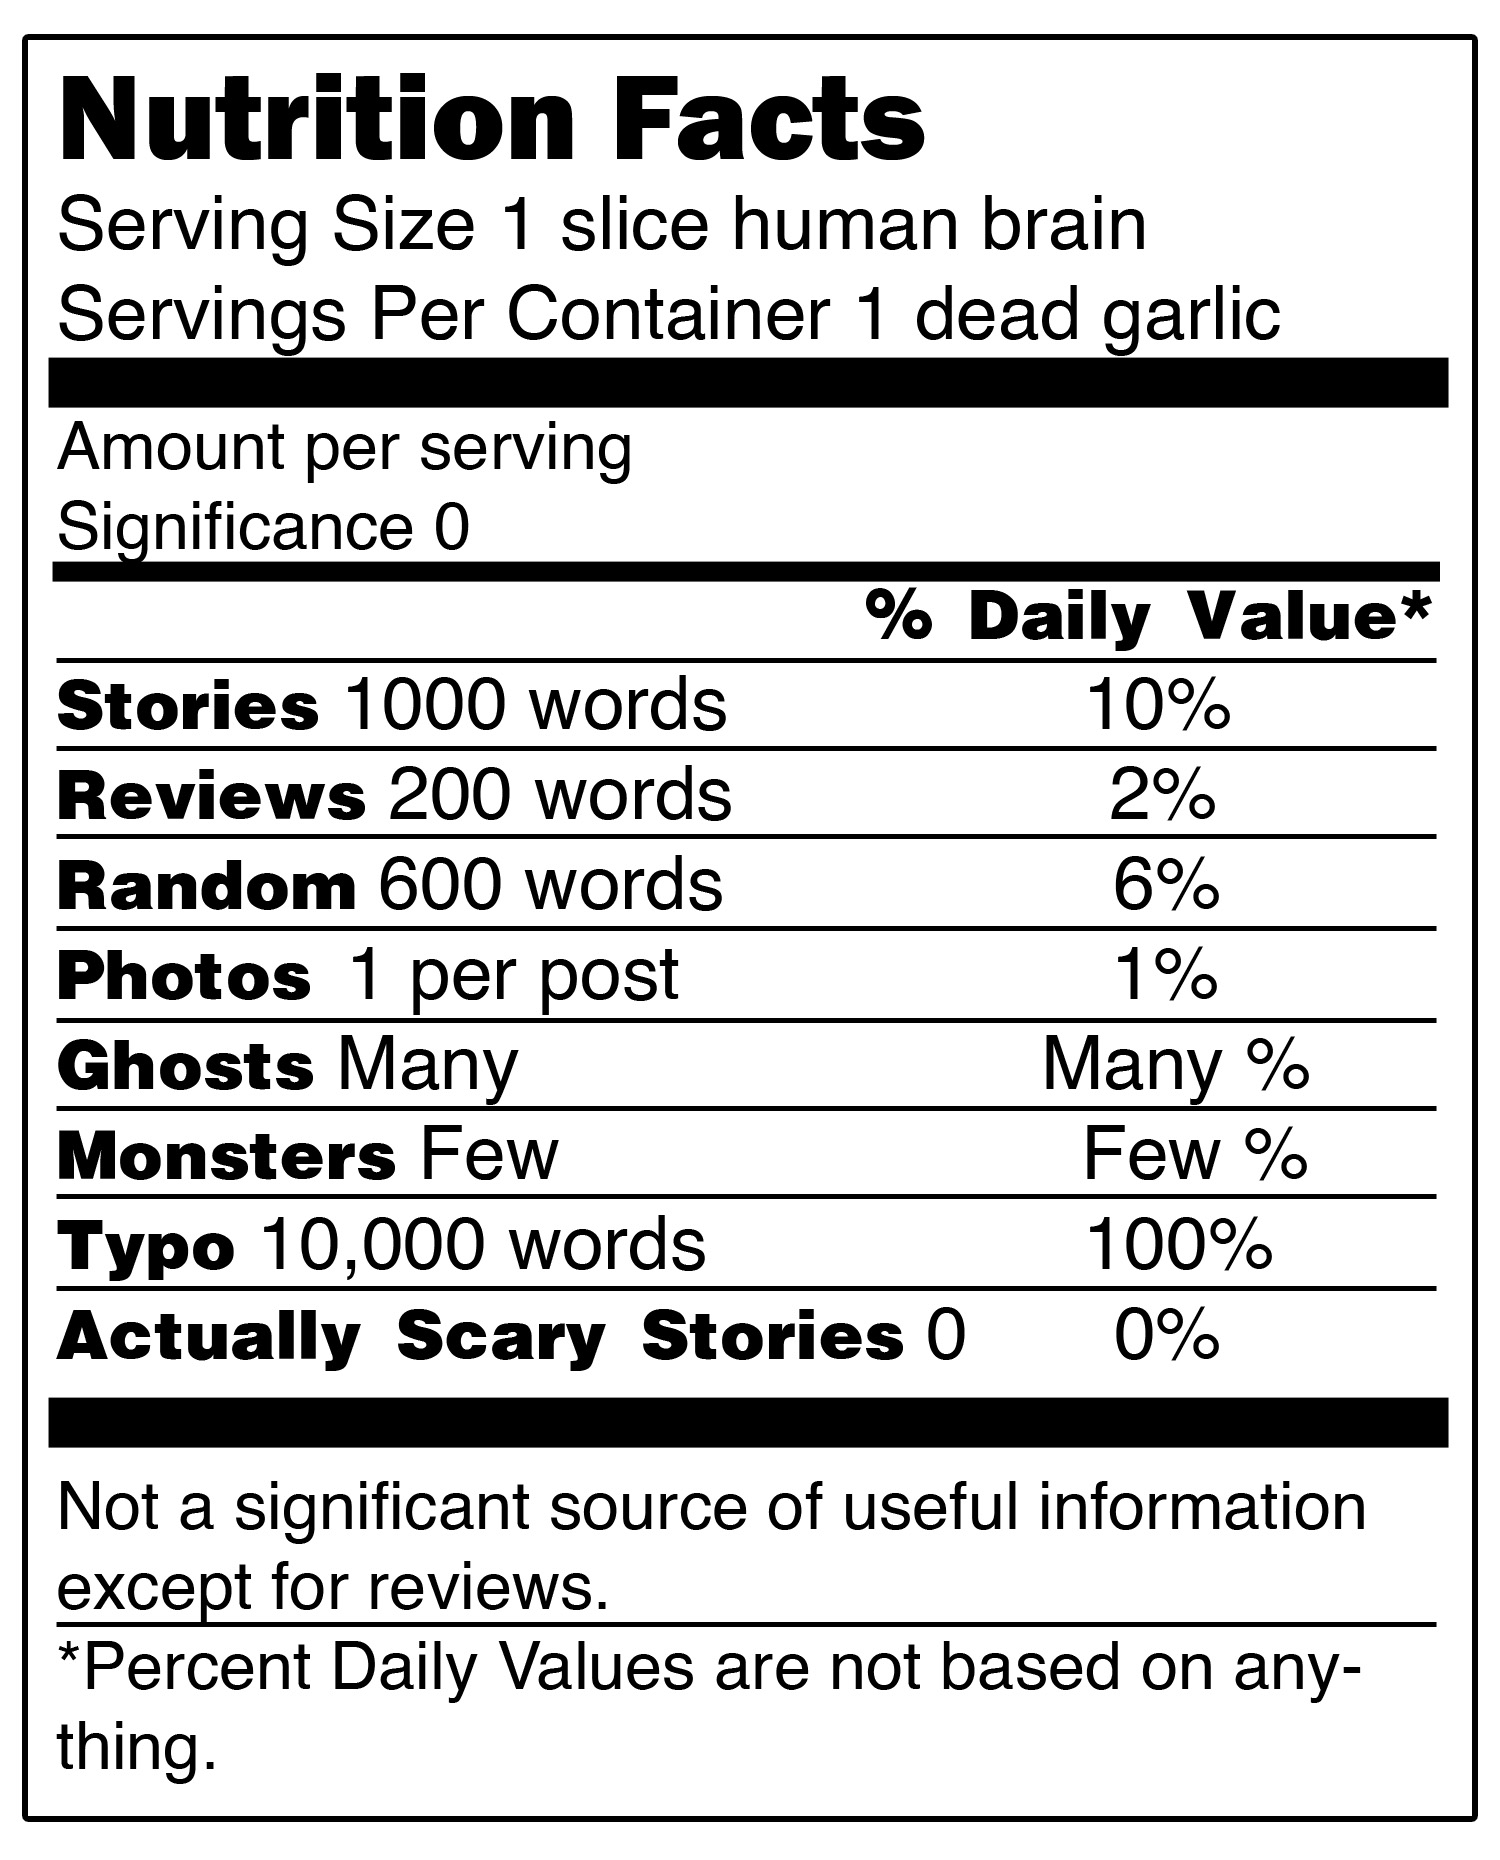 Nutrition Facts Nutrition Facts Dead Garlic.